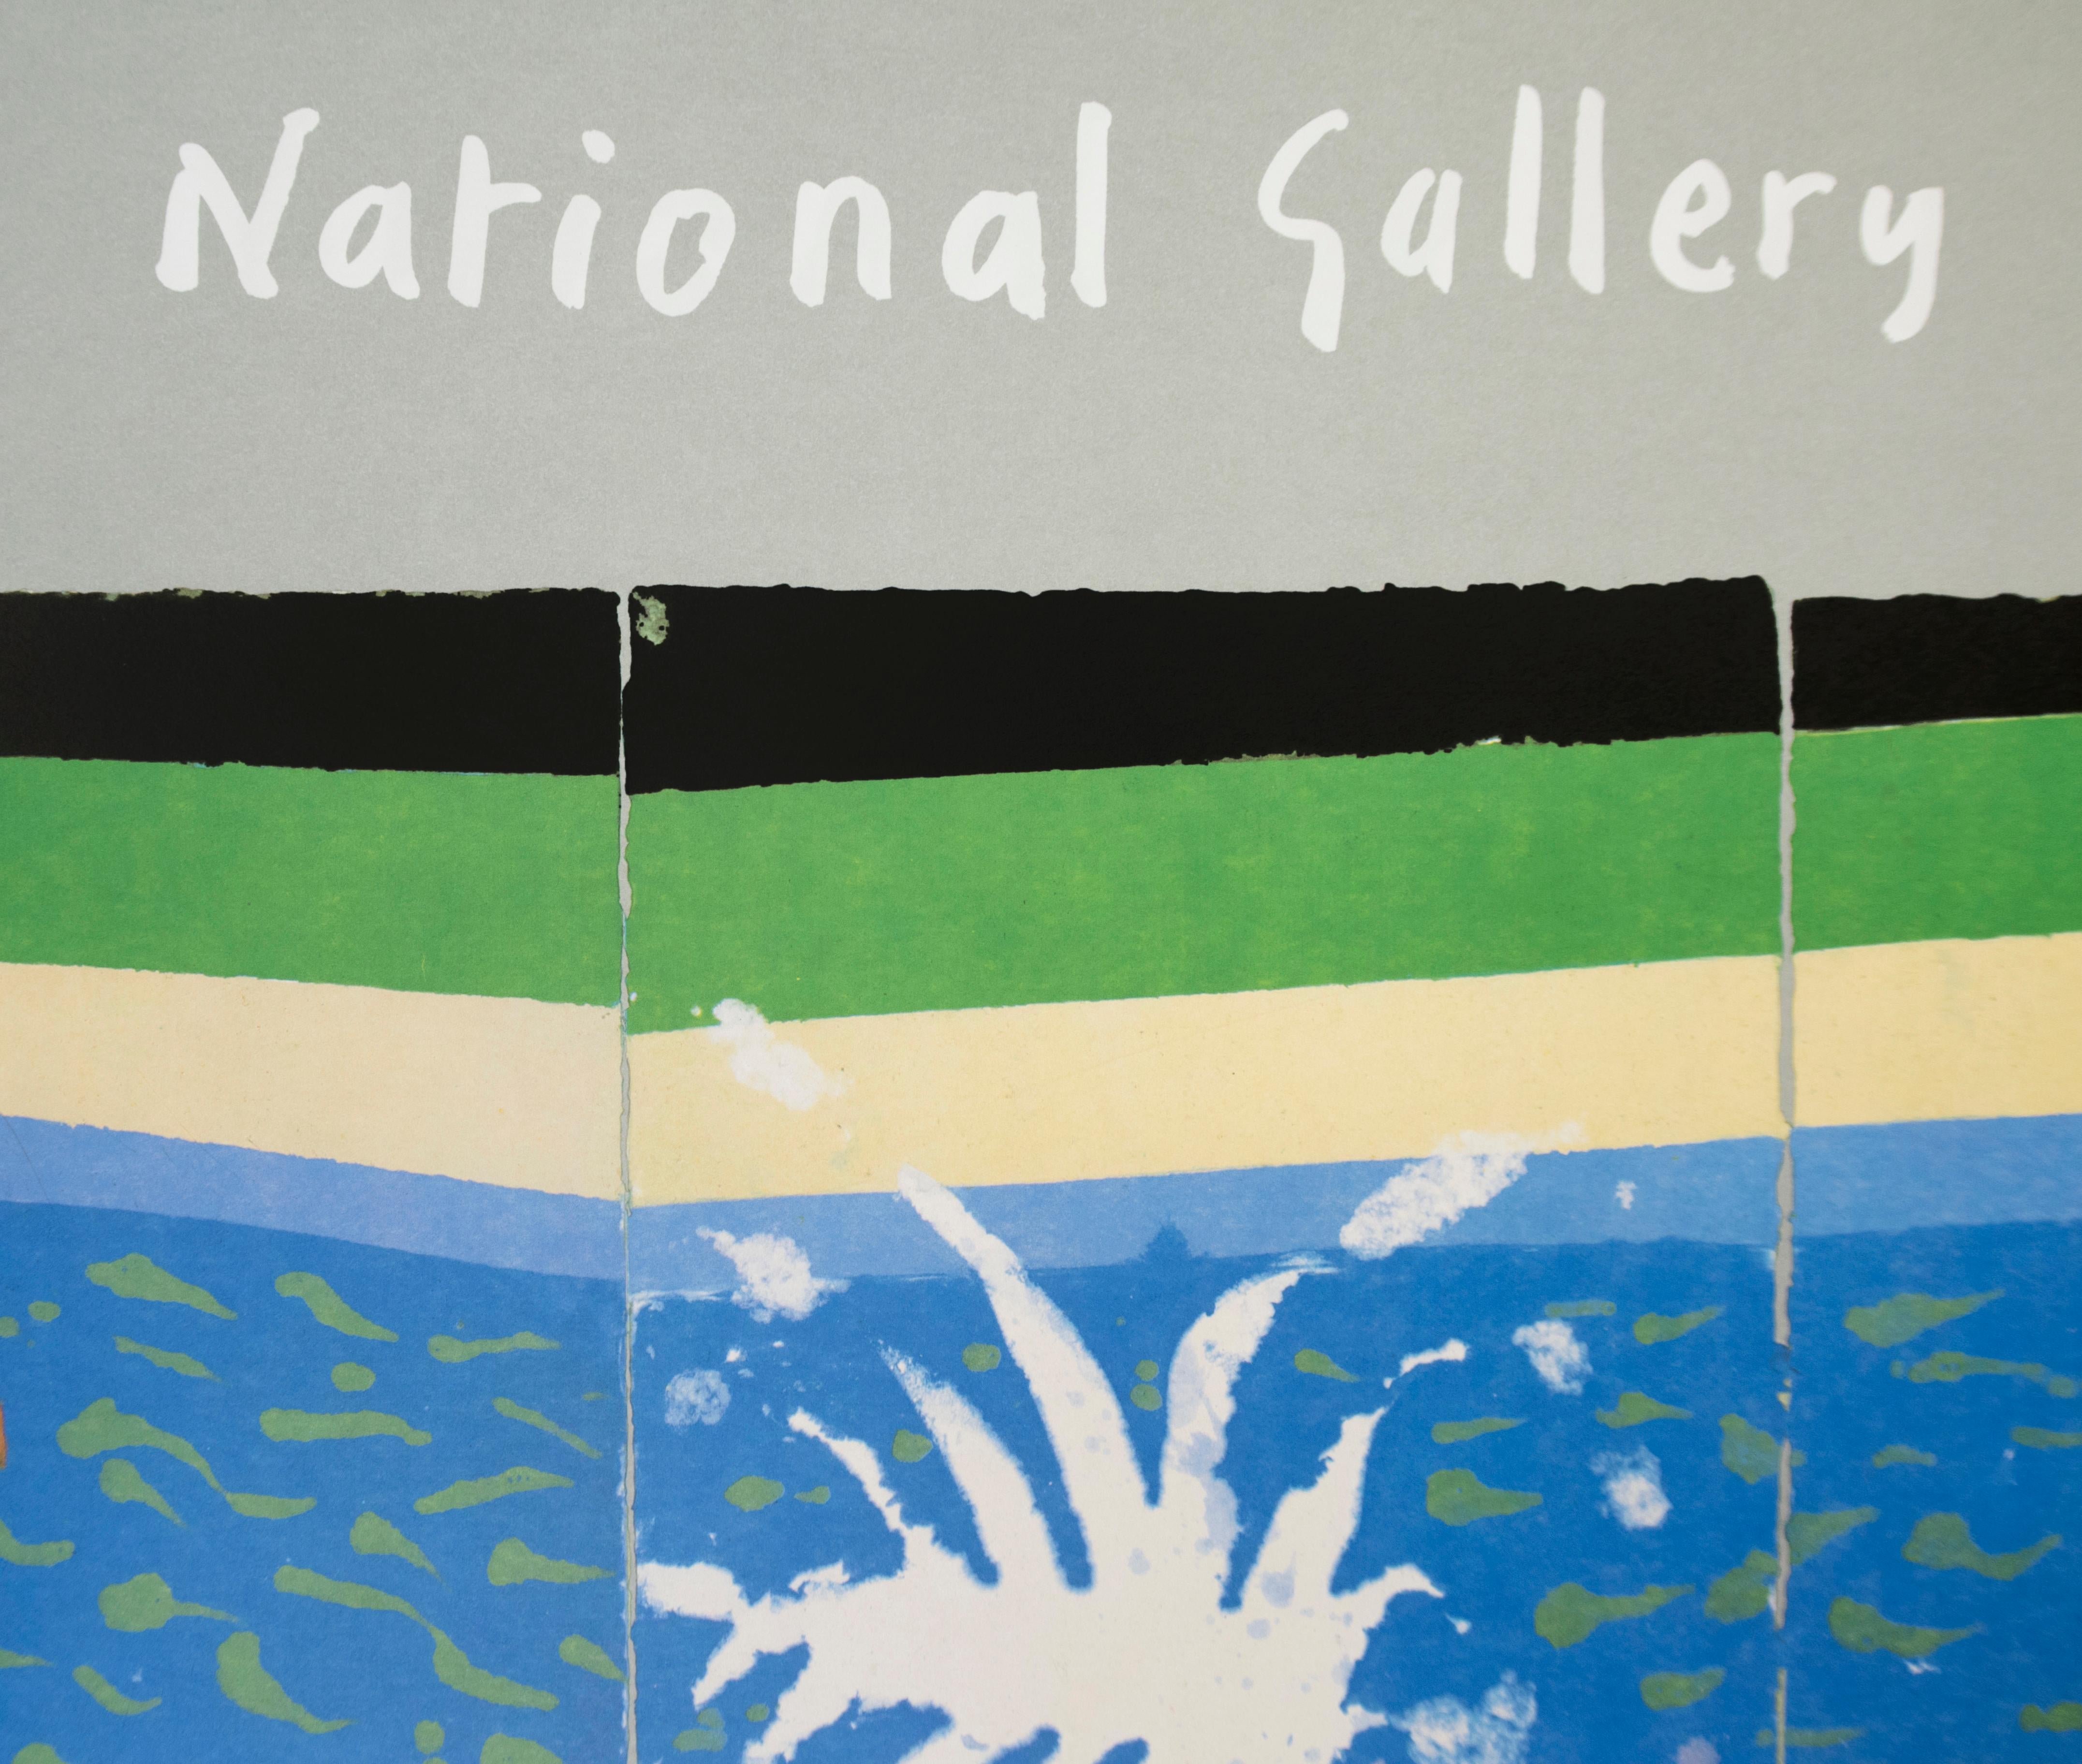 The Australian National Gallery Canberra (Paper Pool 17) vintage poster - Contemporary Print by David Hockney